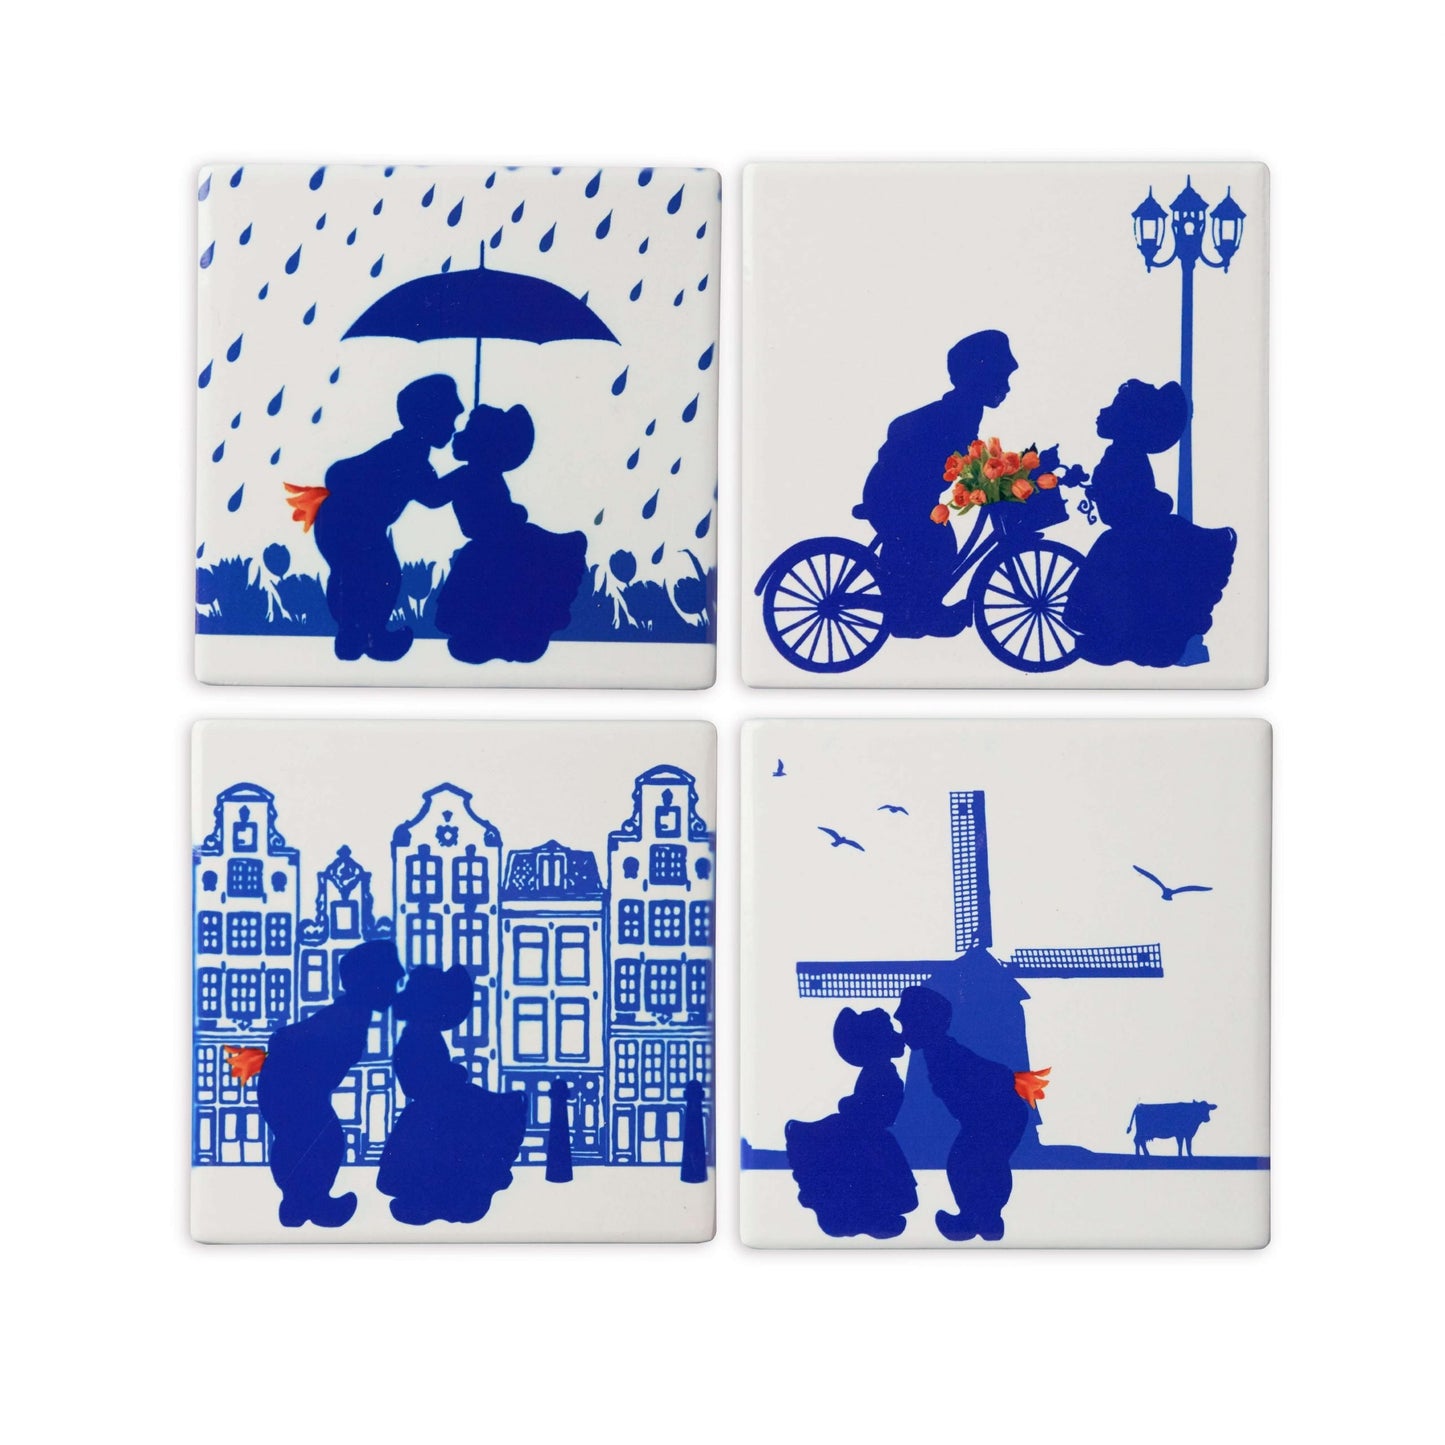 Delft Blue Ceramic Coasters with 4 Images of Dutch Kissing Couples